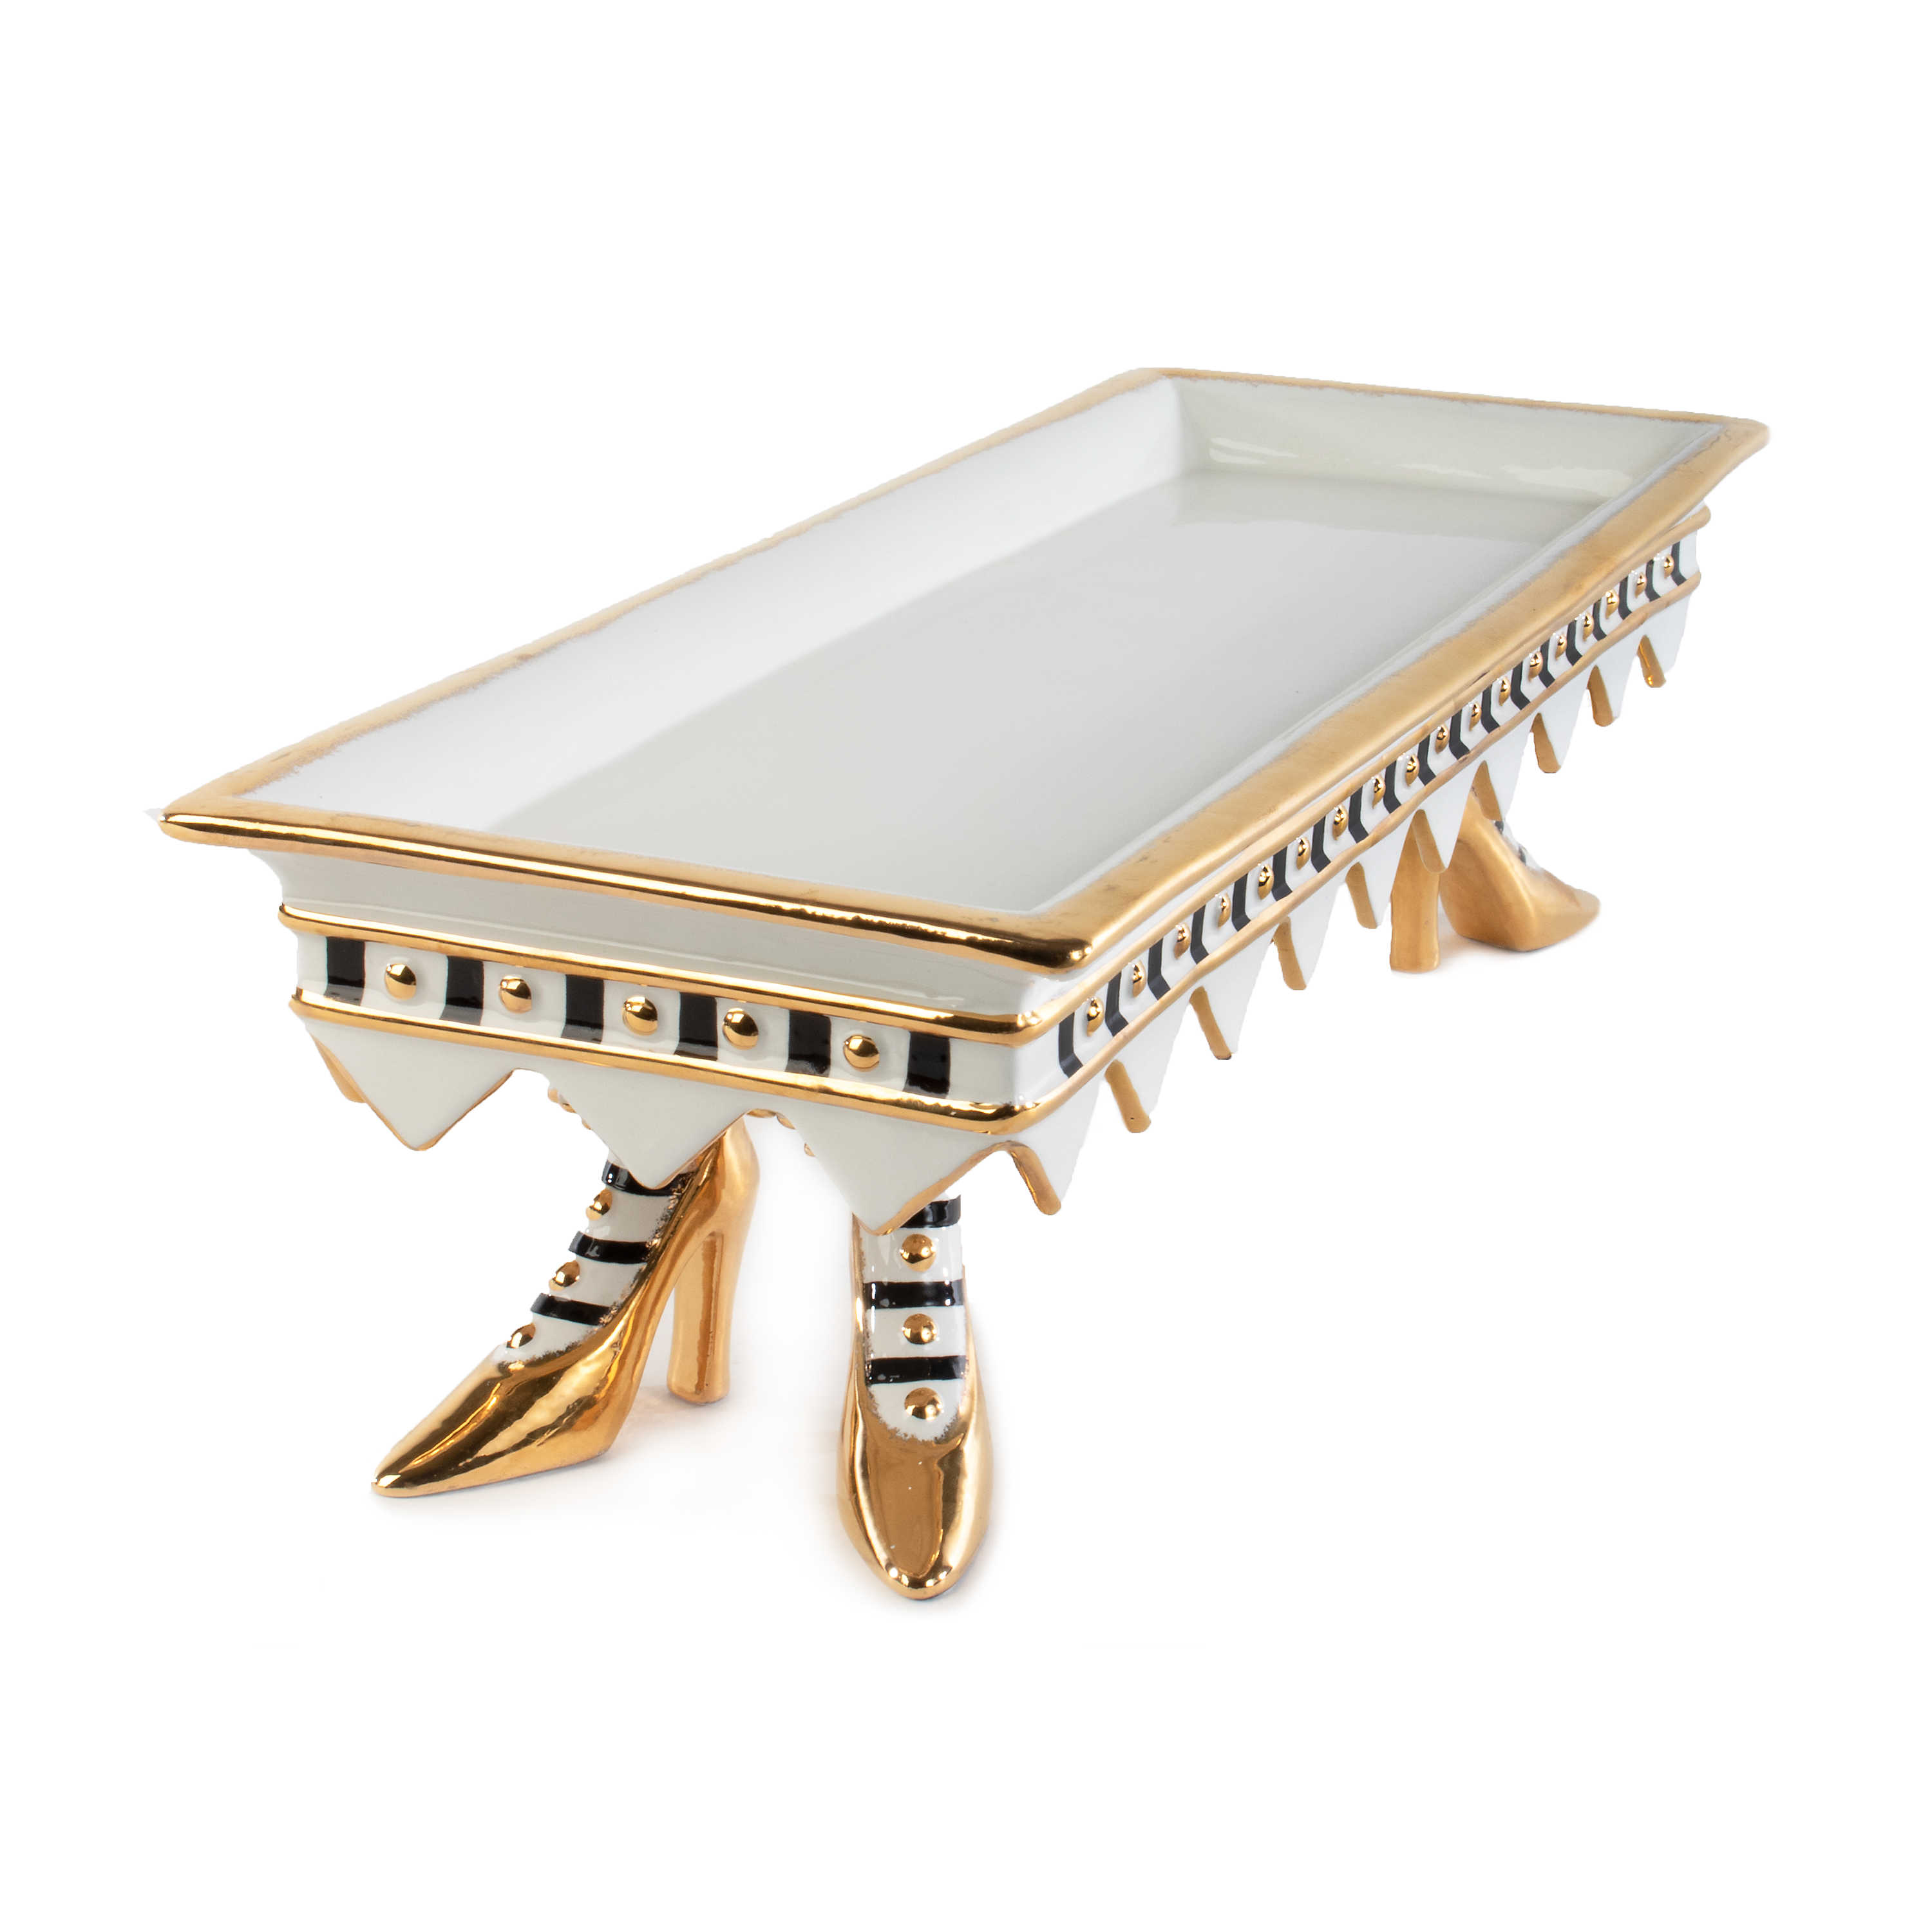 Patience Brewster High Heel Shoe Serving Tray - Ivory & Gold mackenzie-childs Panama 0